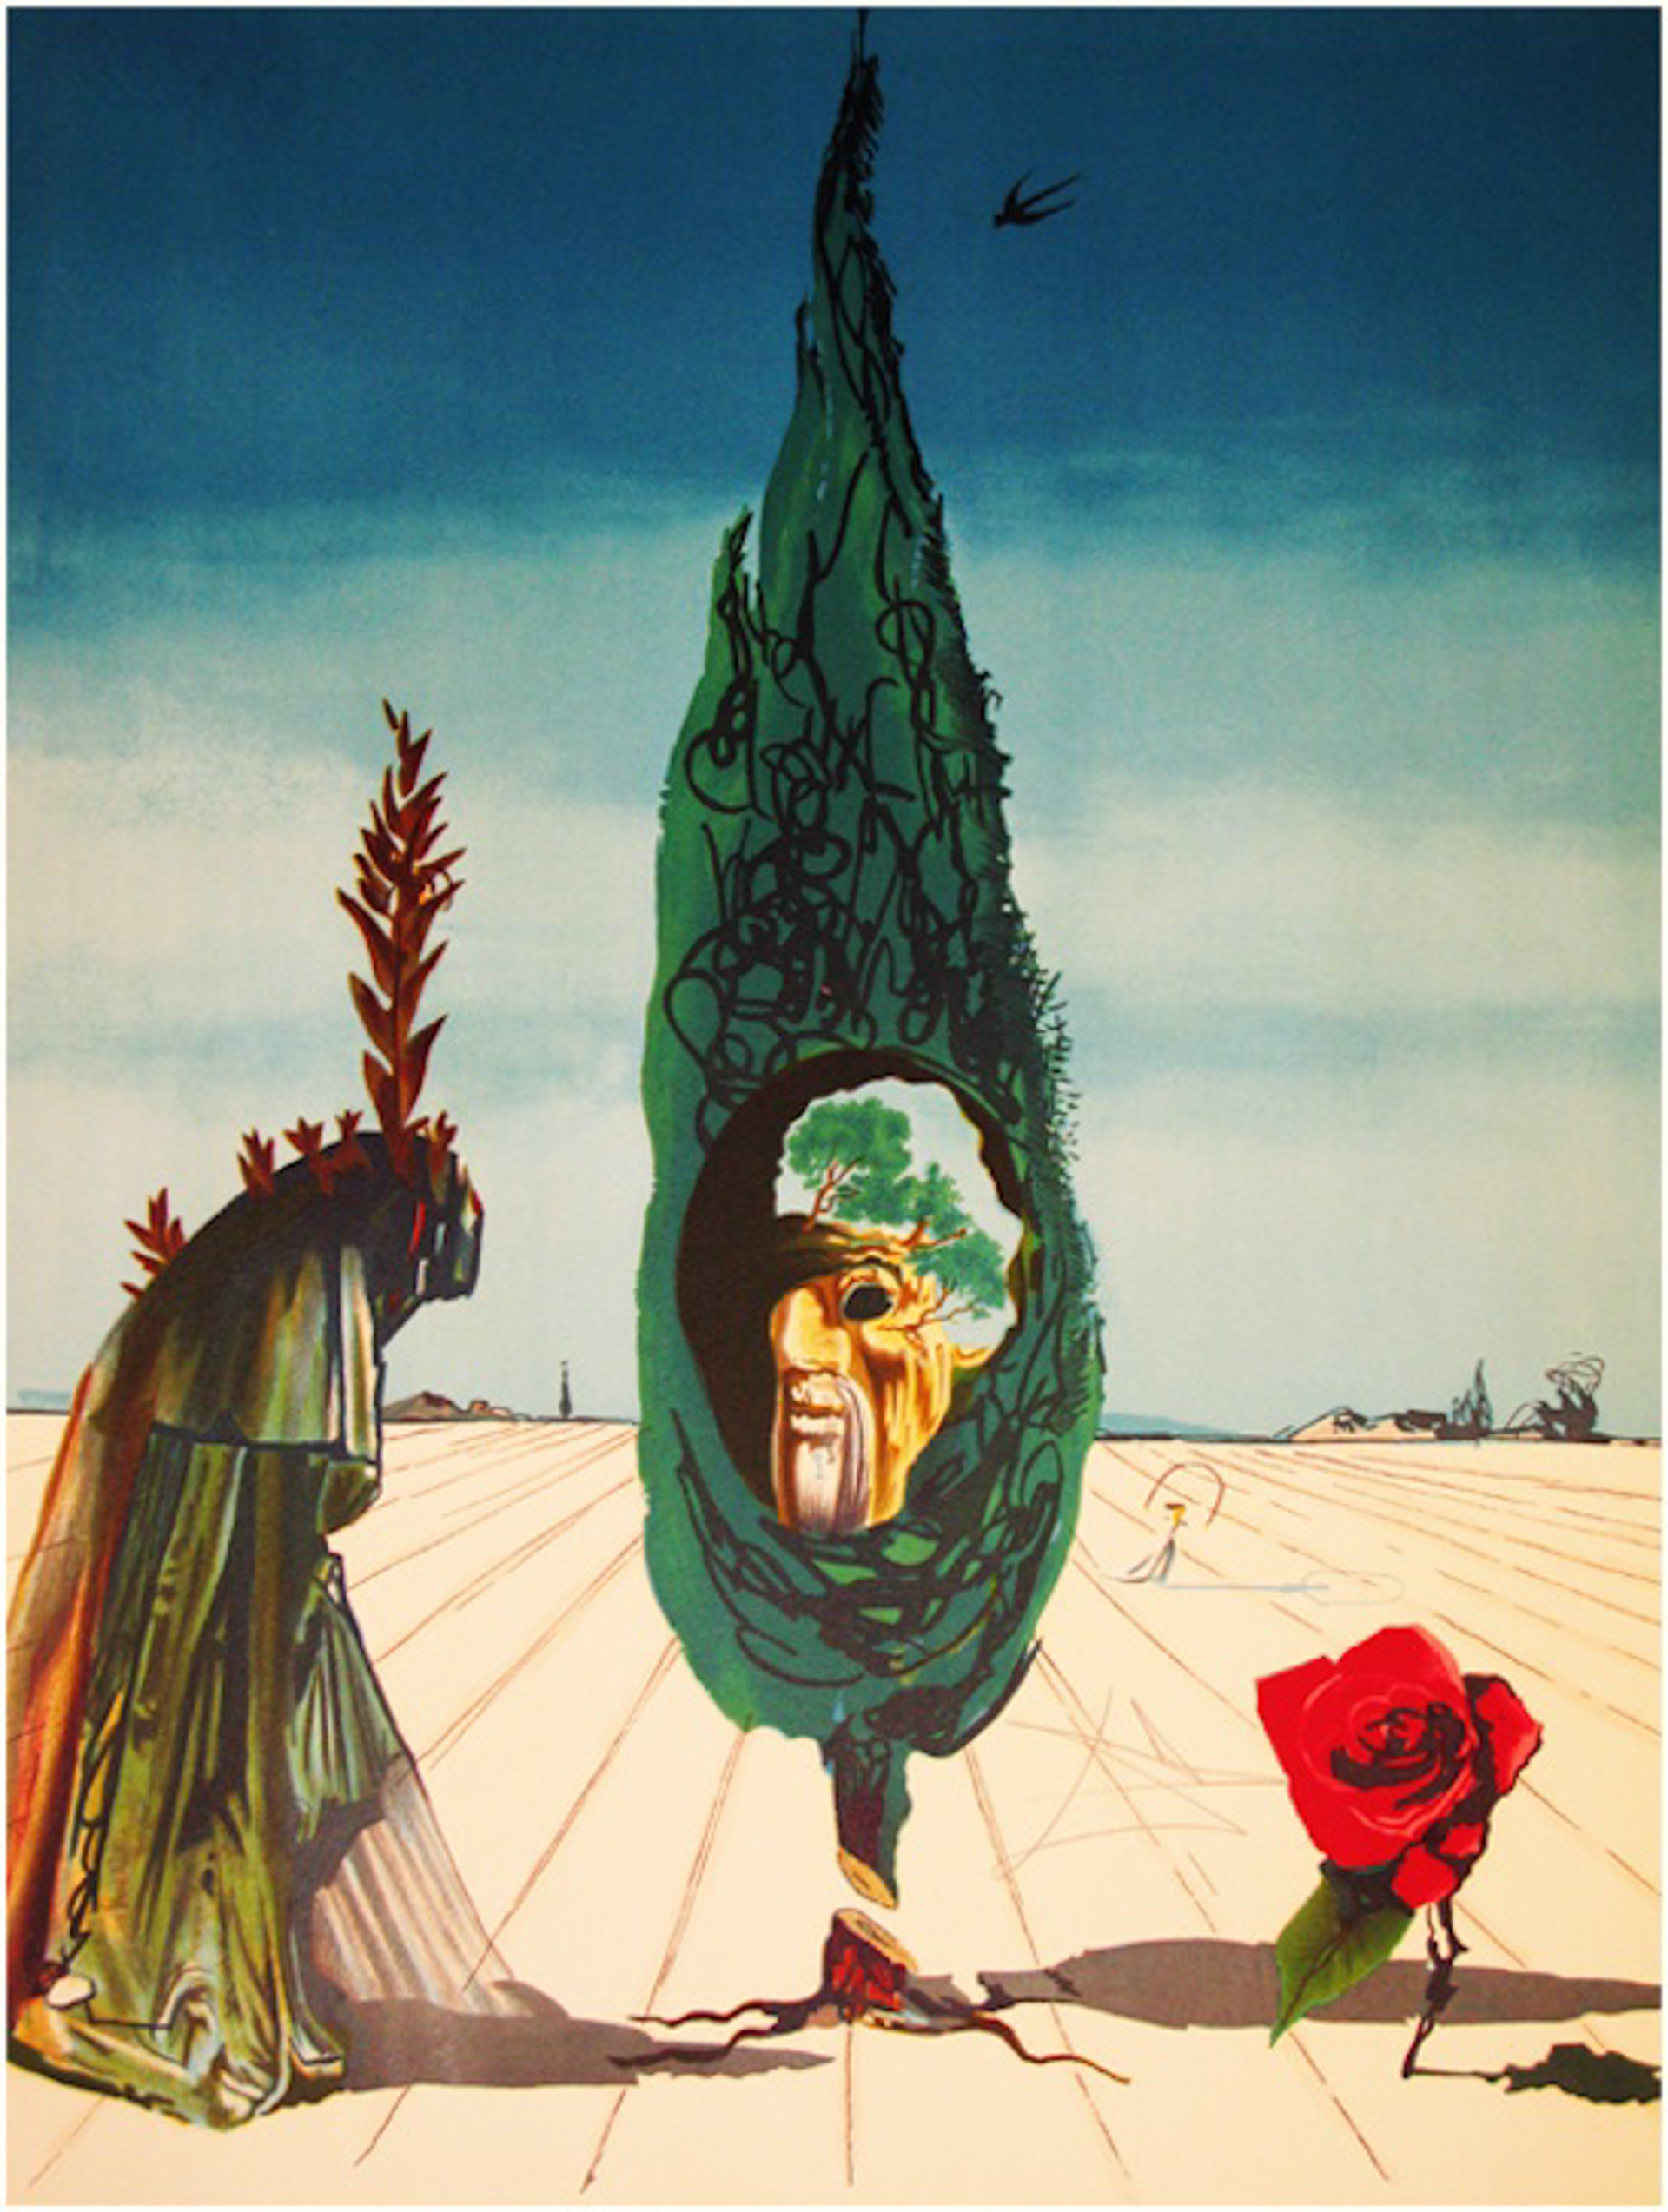 Enigma of the Rose/Death (from Visions Surrealiste Suite of 4) by Salvador Dali